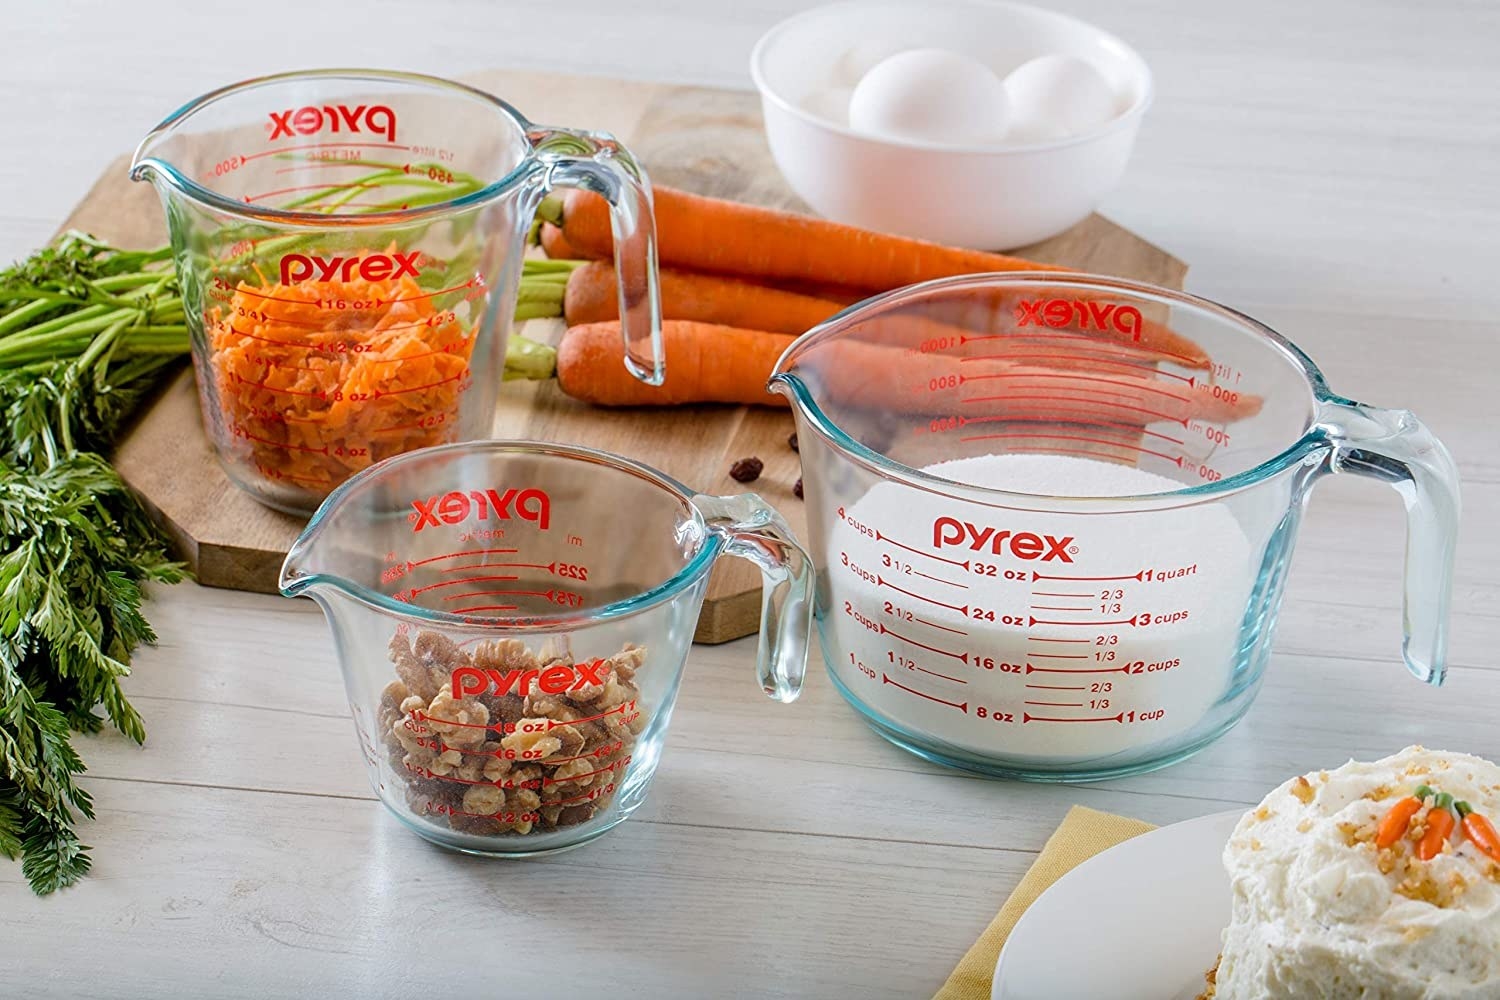 the three-piece measuring cup set